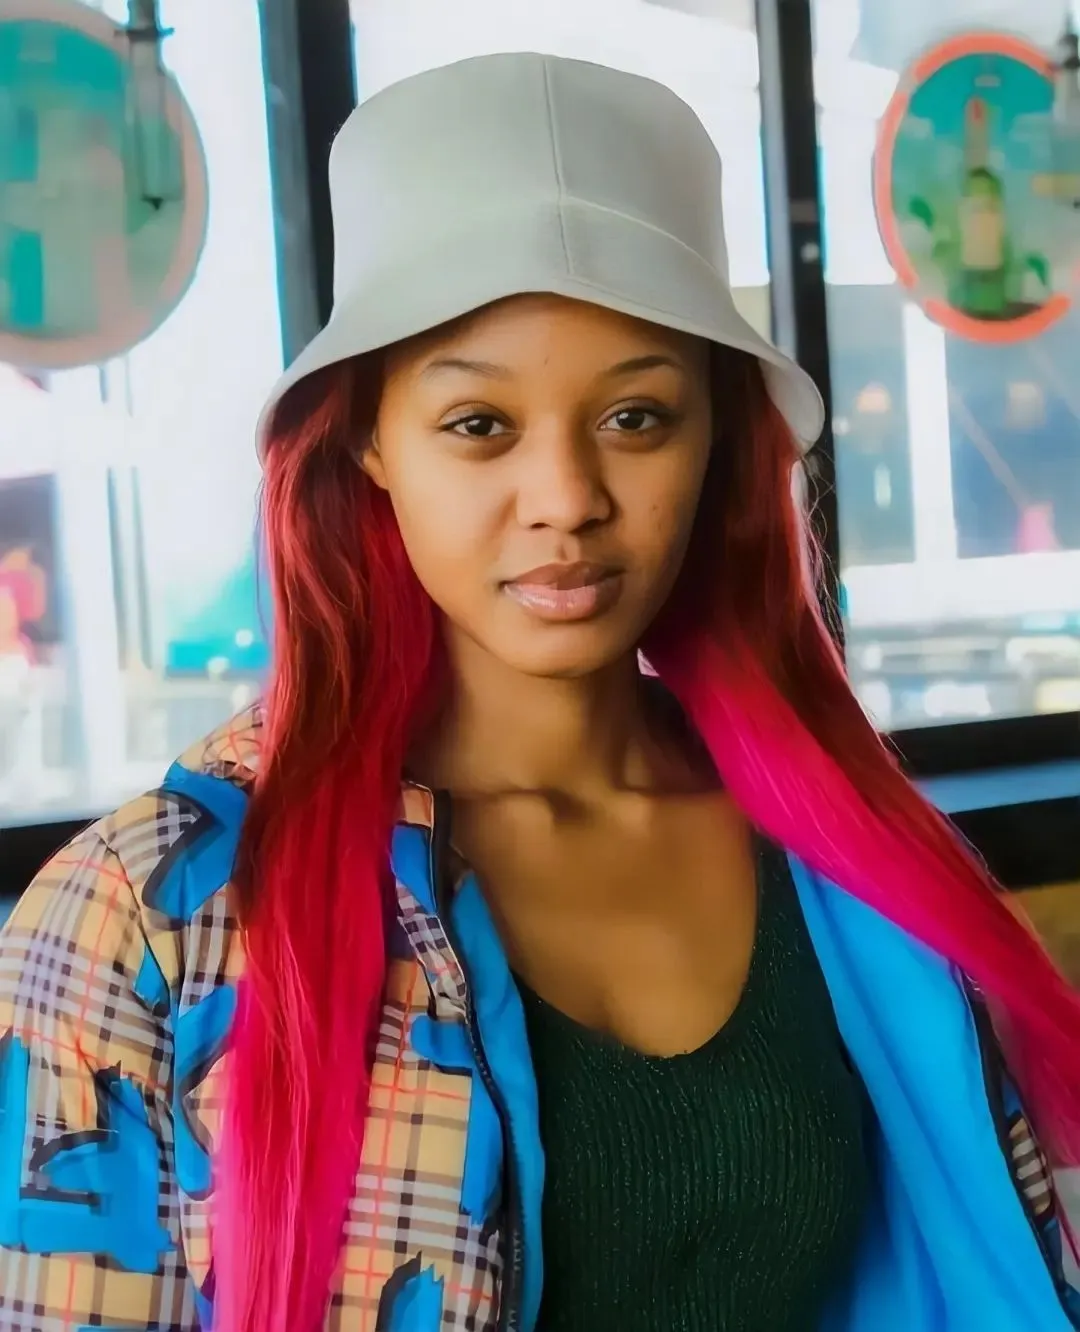 Babes Wodumo reacts to reports of being critically ill